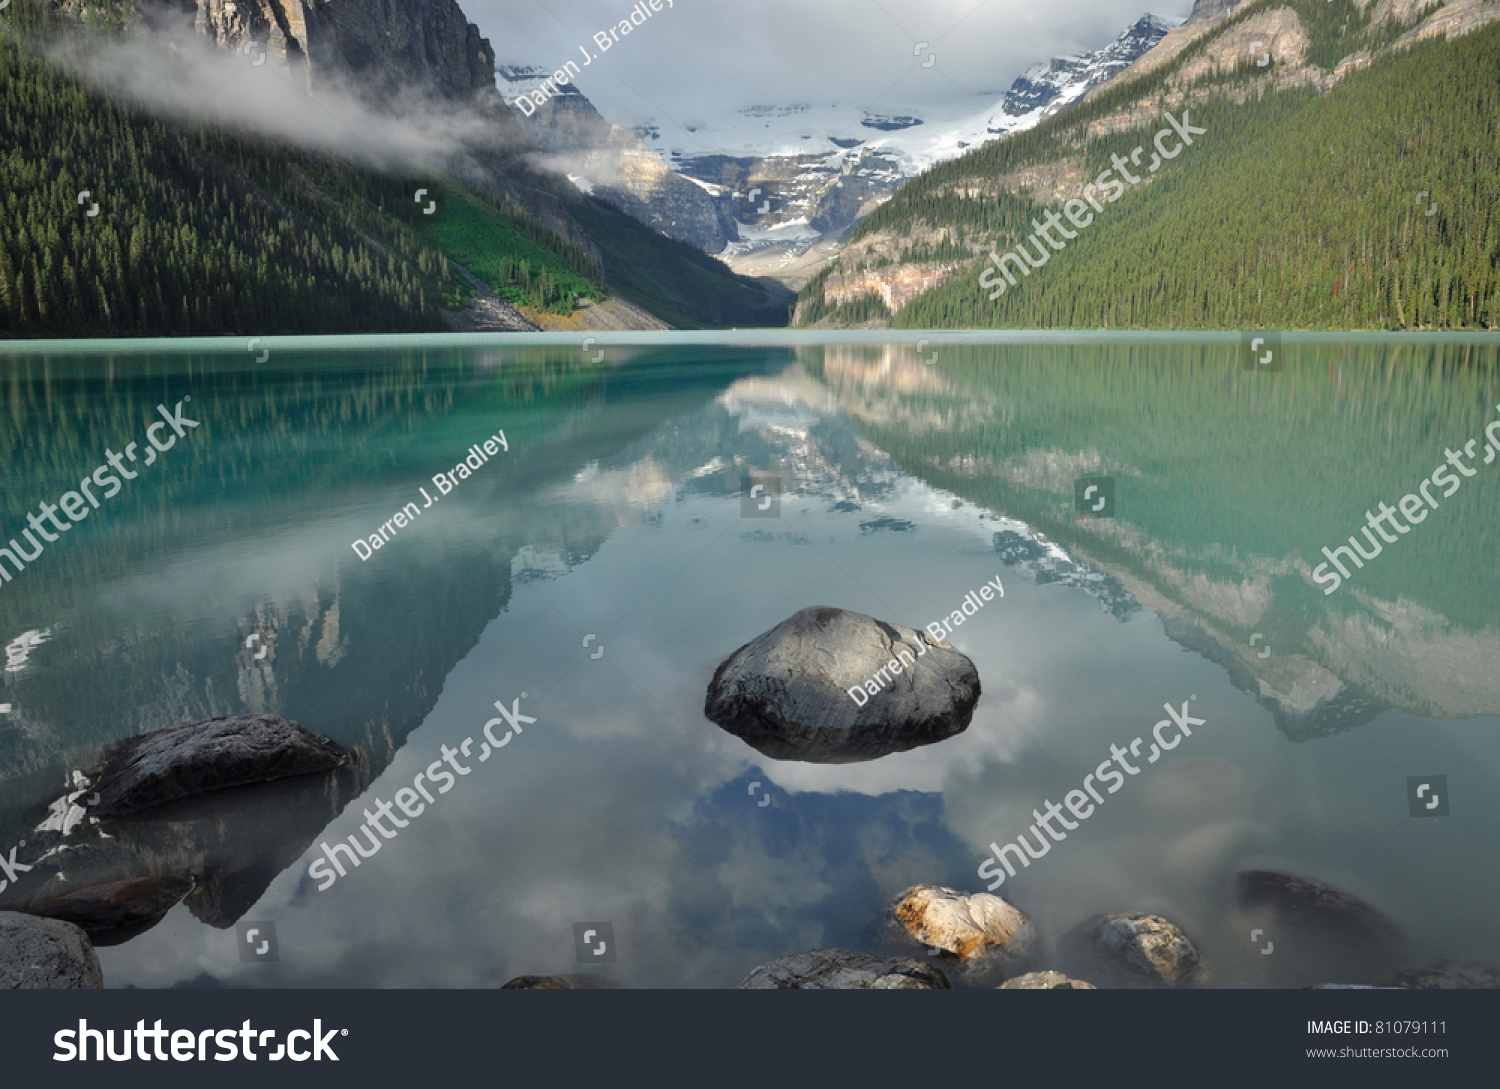 In Banff National Park Alberta Canada A Beautiful Reflection Of The